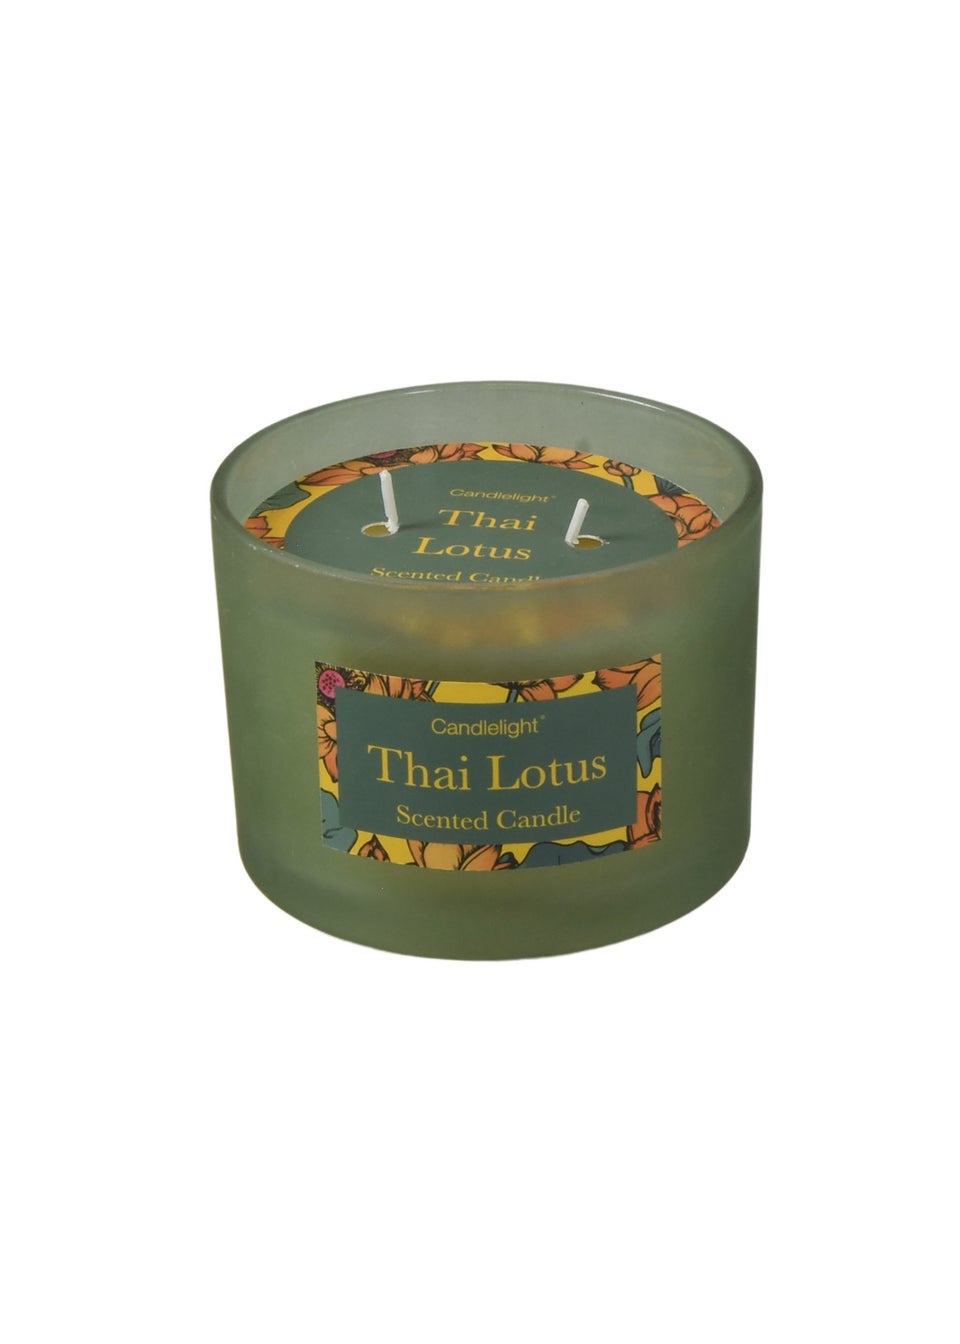 Candlelight Thai Lotus Scented Candle